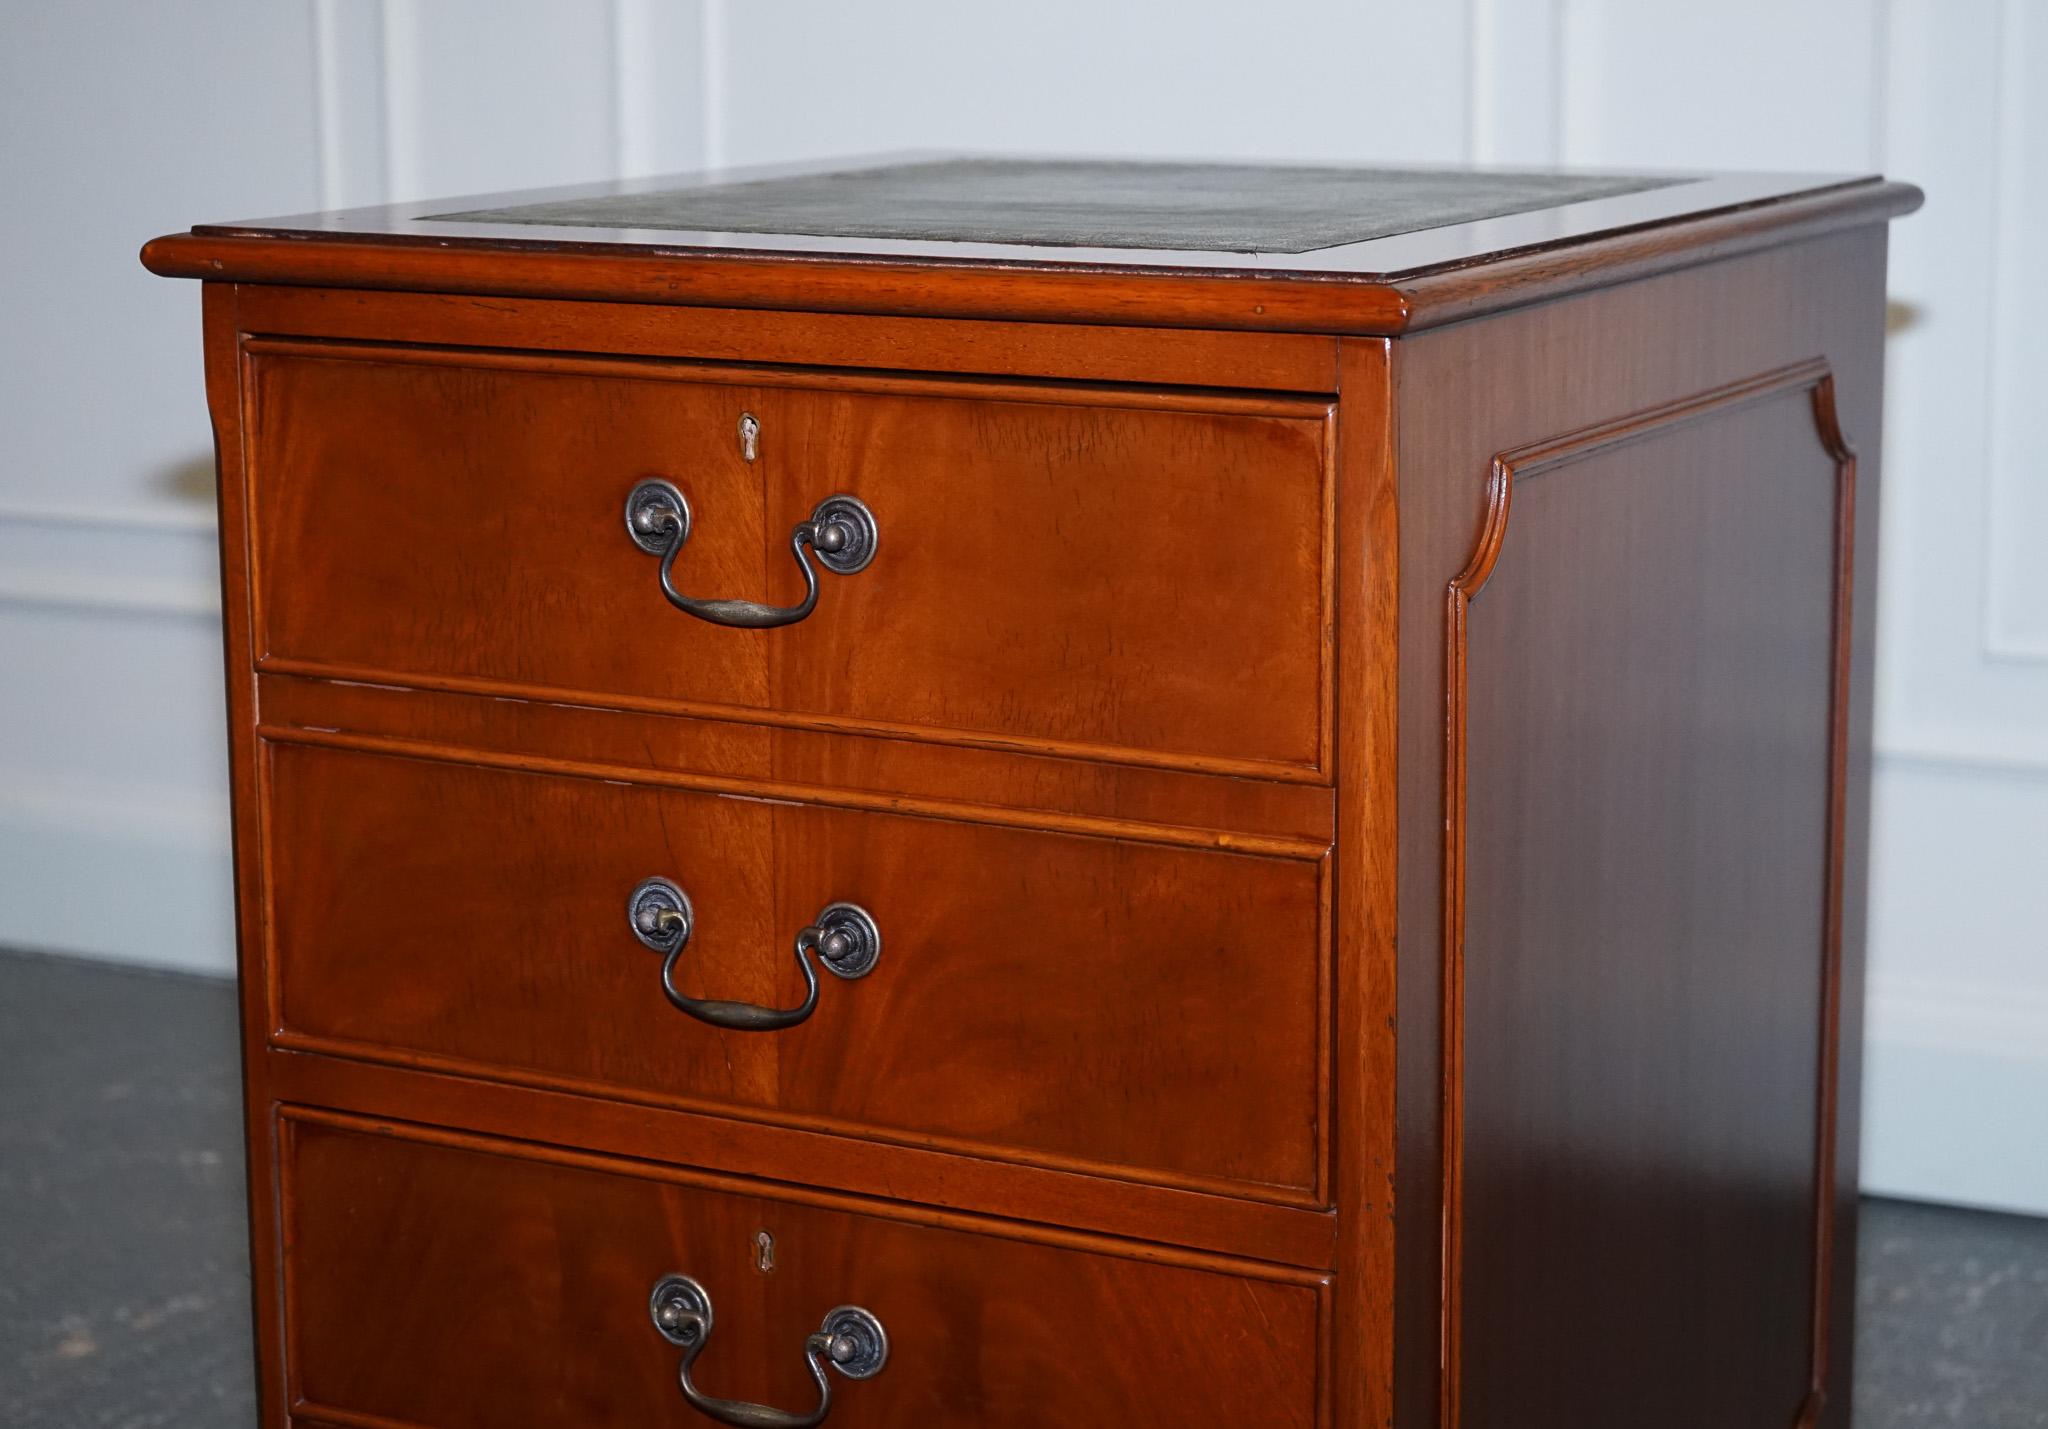 Yew Wood Green Leather Top Filling Cabinet In Good Condition For Sale In Pulborough, GB